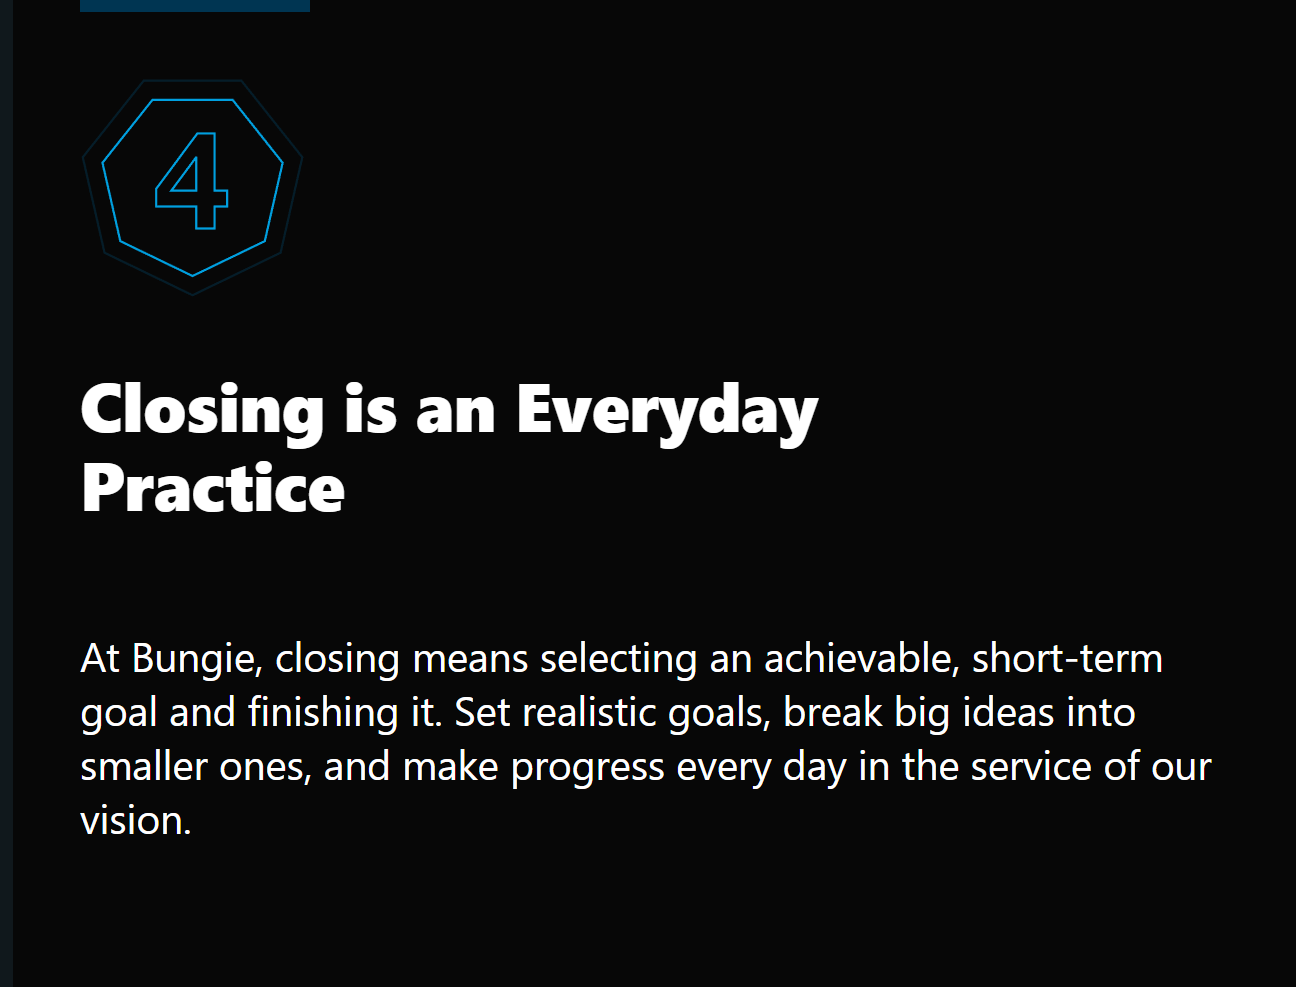 Closing is an Everyday Practice